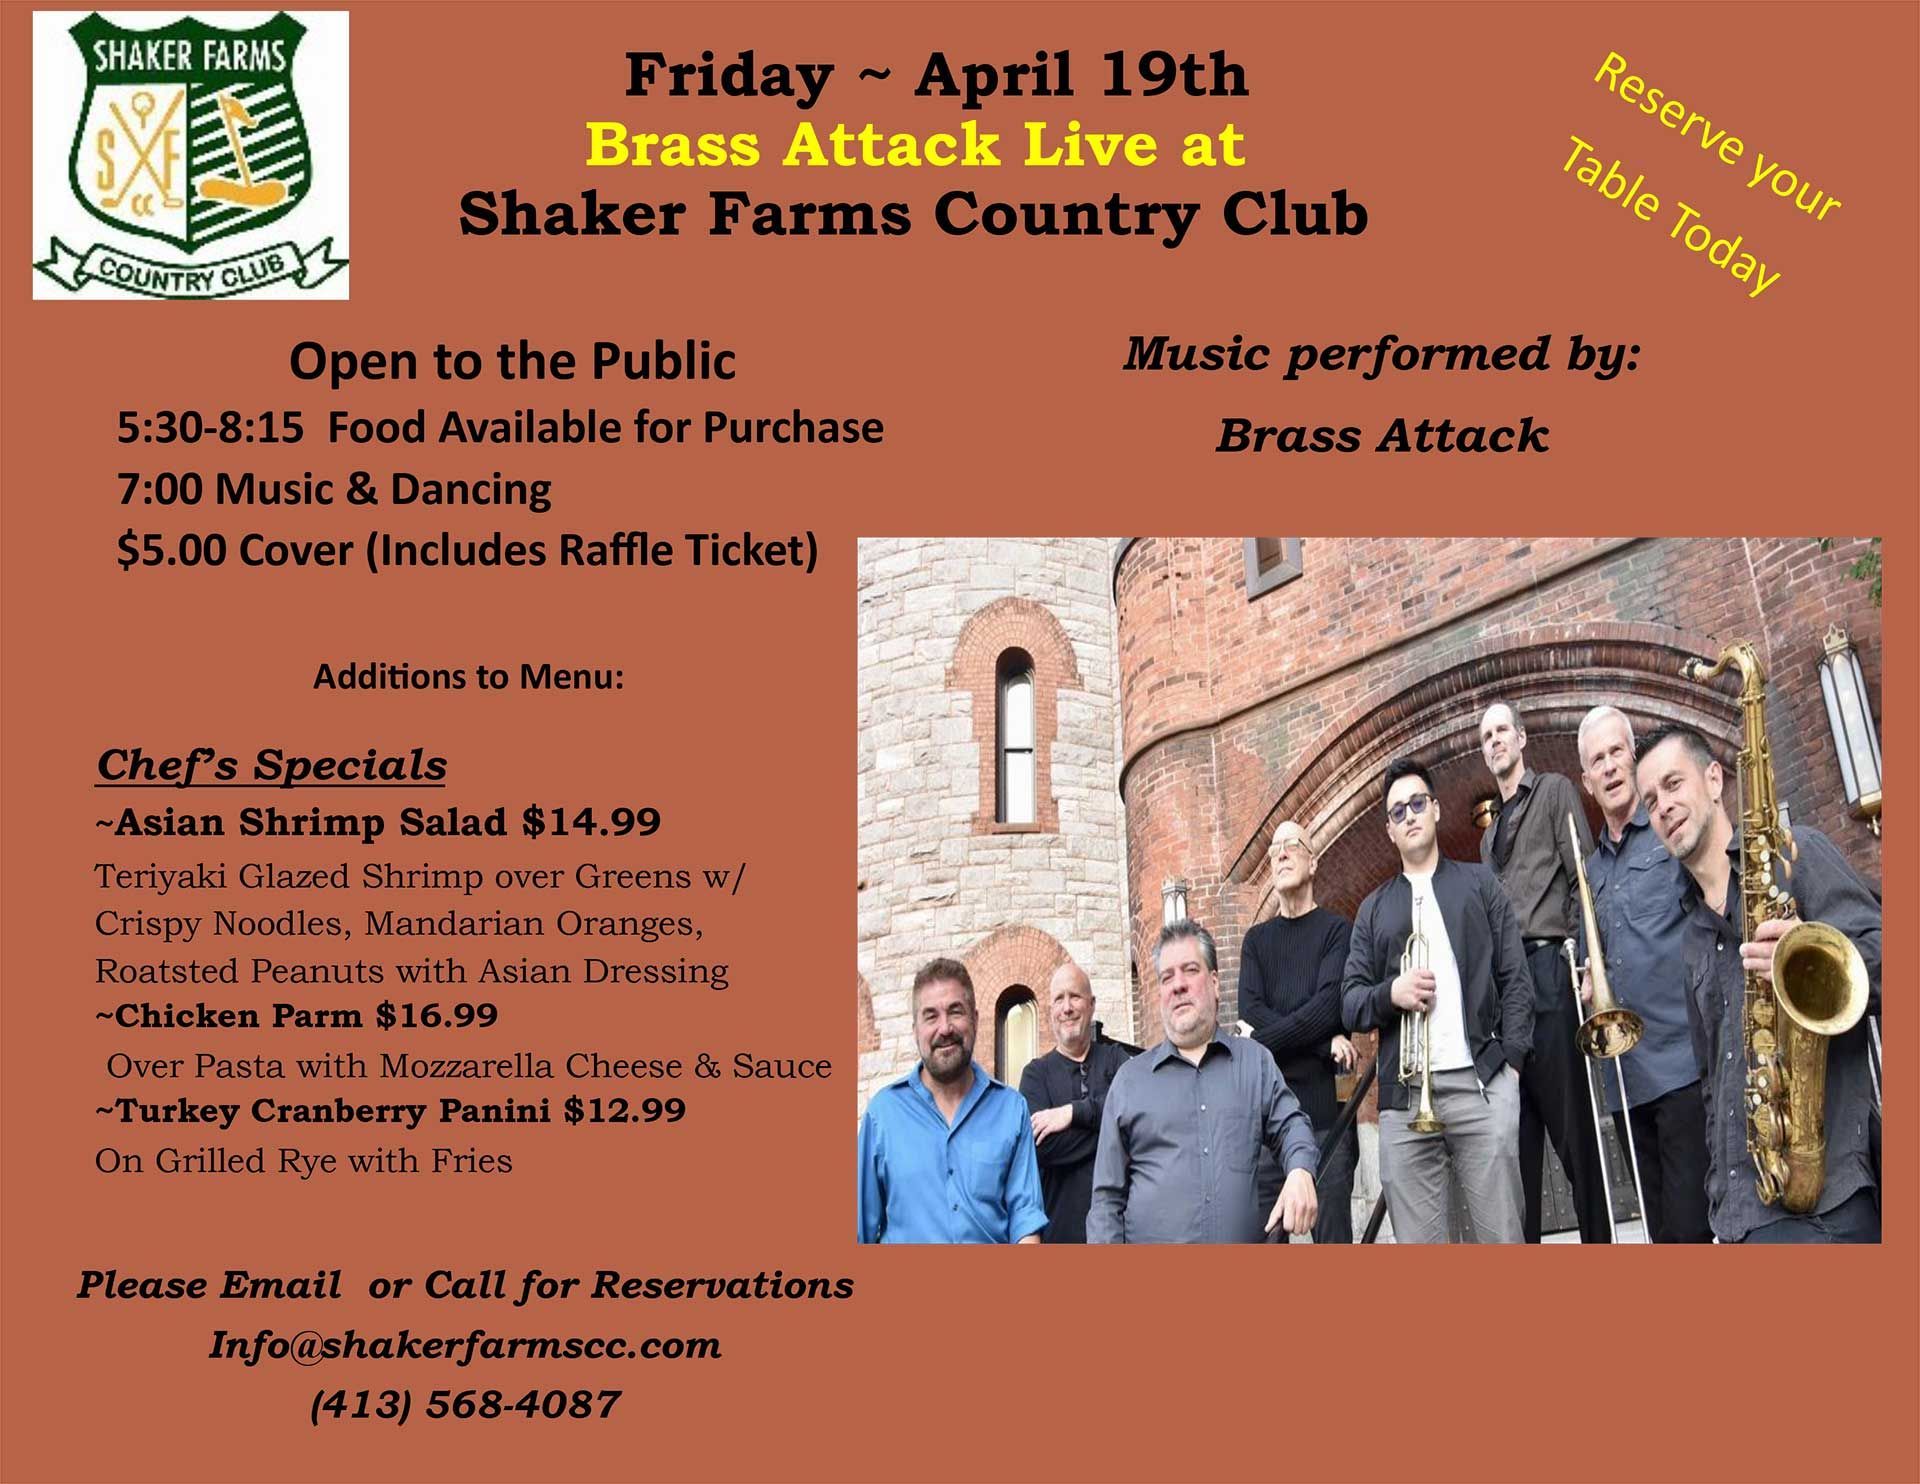 Brass Attack Live at Shaker Farms Country Club - Friday - April 19th